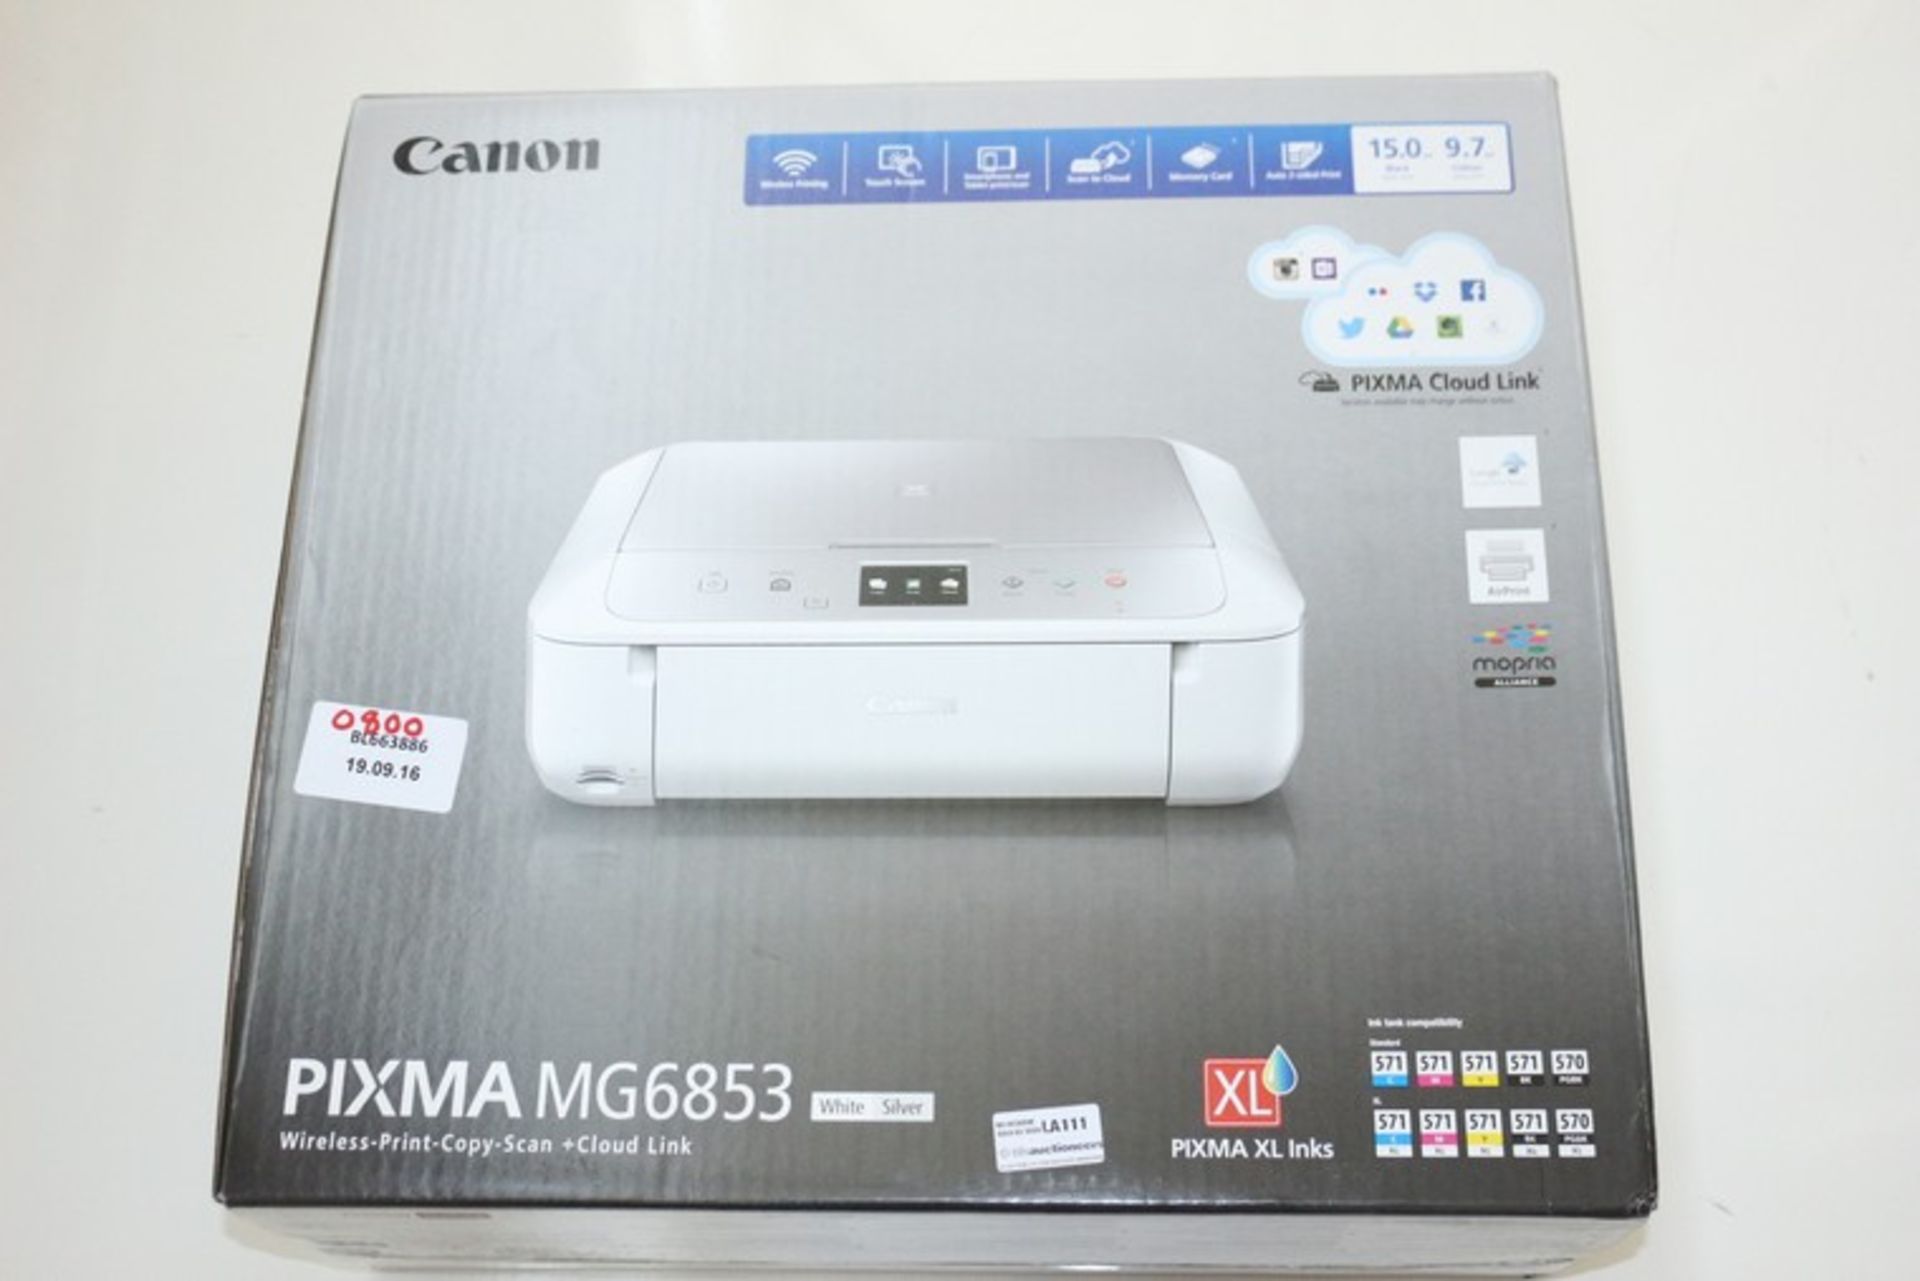 1 x CANON PIXMA MG6853 ALL IN ONE PRINTER SCANNER COPIER RRP £80 *PLEASE NOTE THAT THE BID PRICE